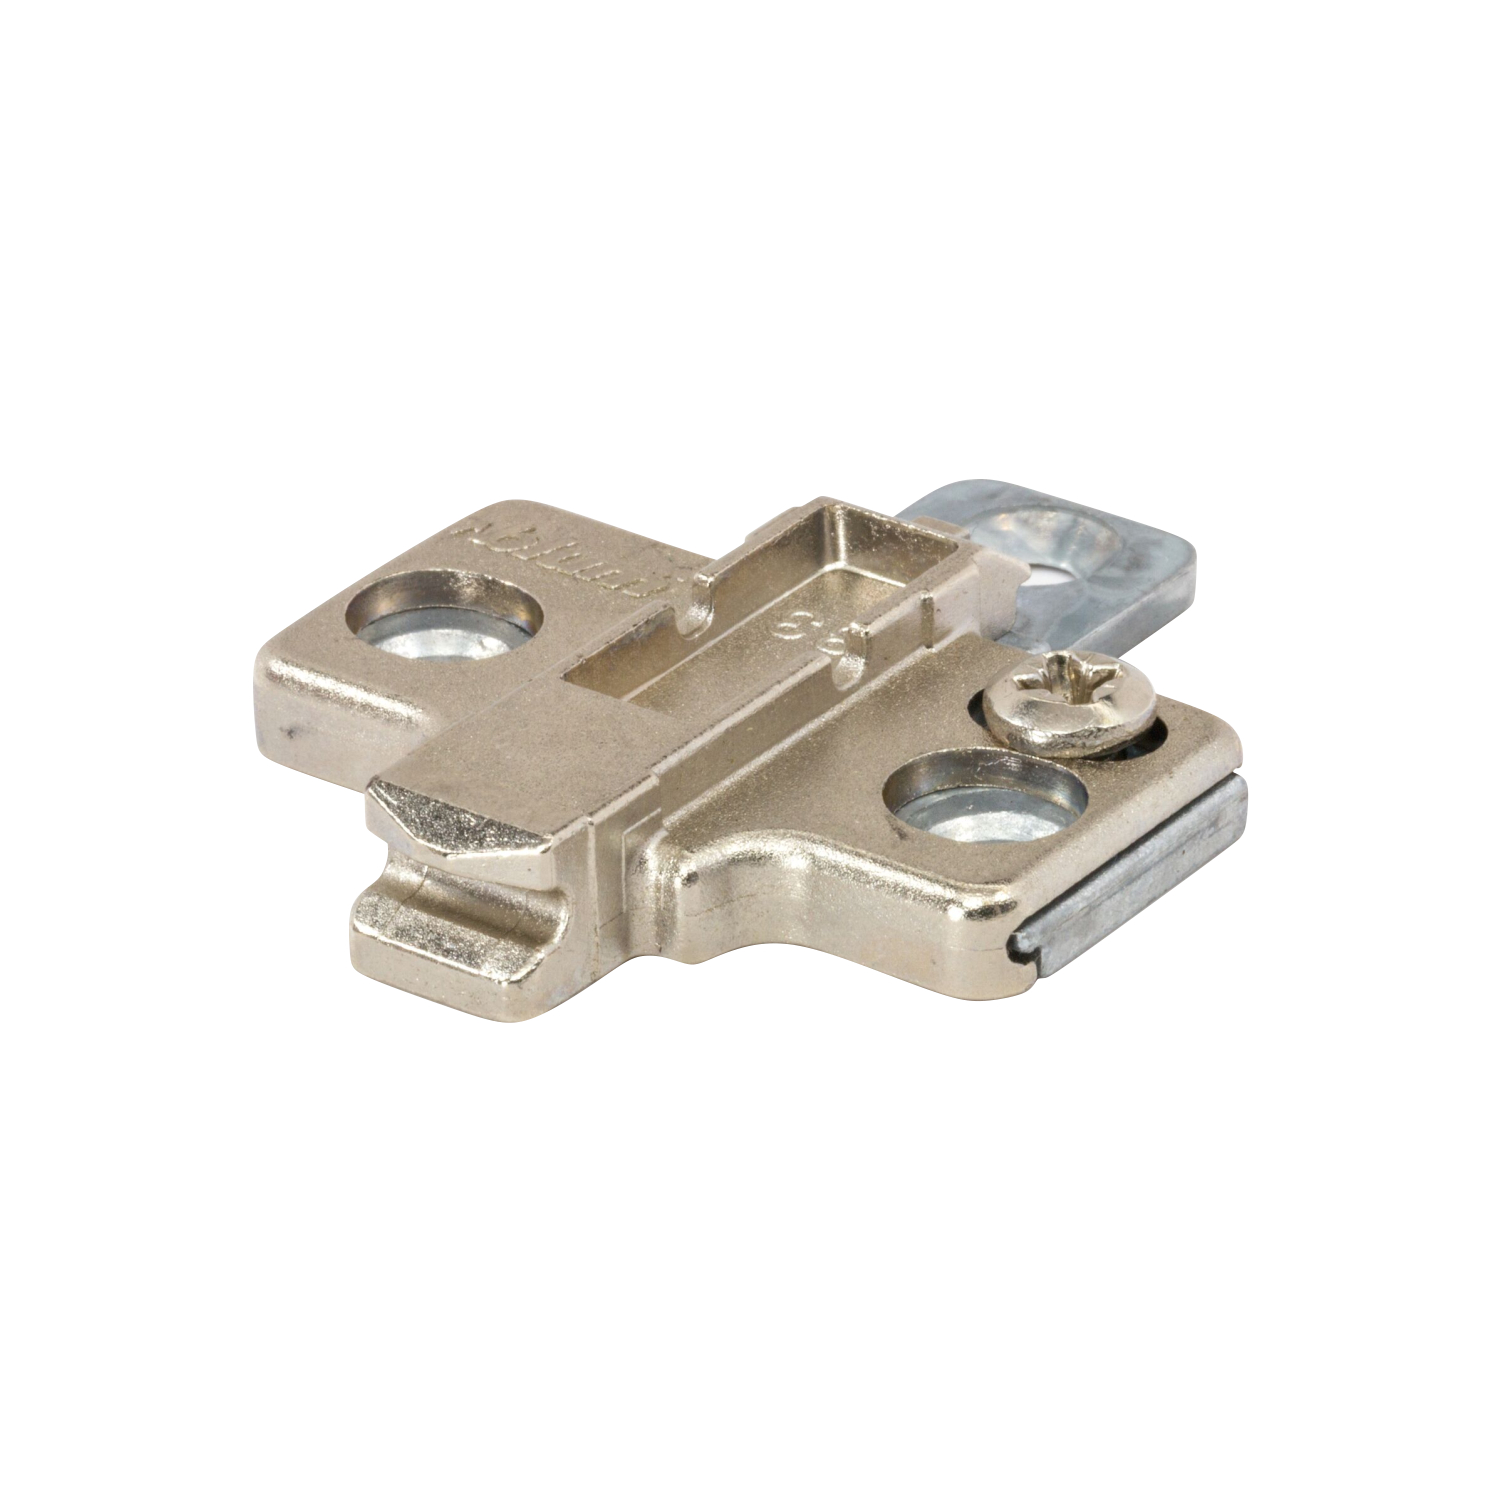 Blum 0mm Die Cast Frameless Clip Two-Piece Mounting Plate, System Screw Version 175H9100 - image 1 of 2